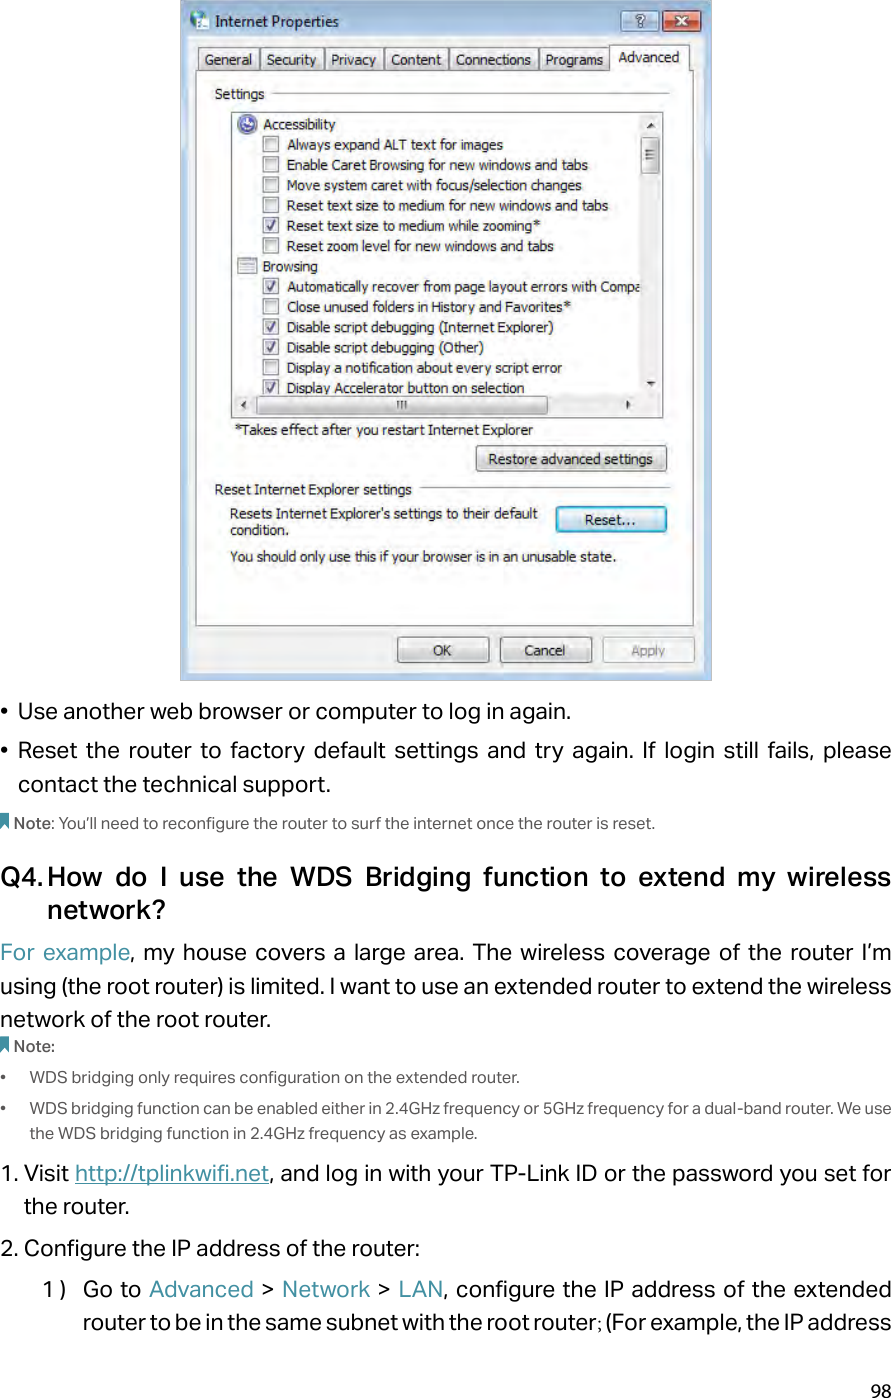 98•  Use another web browser or computer to log in again.•  Reset the router to factory default settings and try again. If login still fails, please contact the technical support.Note: You’ll need to reconfigure the router to surf the internet once the router is reset.Q4. How do I use the WDS Bridging function to extend my wireless network?For example, my house covers a large area. The wireless coverage of the router I’m using (the root router) is limited. I want to use an extended router to extend the wireless network of the root router.Note:•  WDS bridging only requires configuration on the extended router.•  WDS bridging function can be enabled either in 2.4GHz frequency or 5GHz frequency for a dual-band router. We use the WDS bridging function in 2.4GHz frequency as example.1. Visit http://tplinkwifi.net, and log in with your TP-Link ID or the password you set for the router. 2. Configure the IP address of the router:1 )  Go to Advanced &gt; Network &gt; LAN, configure the IP address of the extended router to be in the same subnet with the root router; (For example, the IP address 